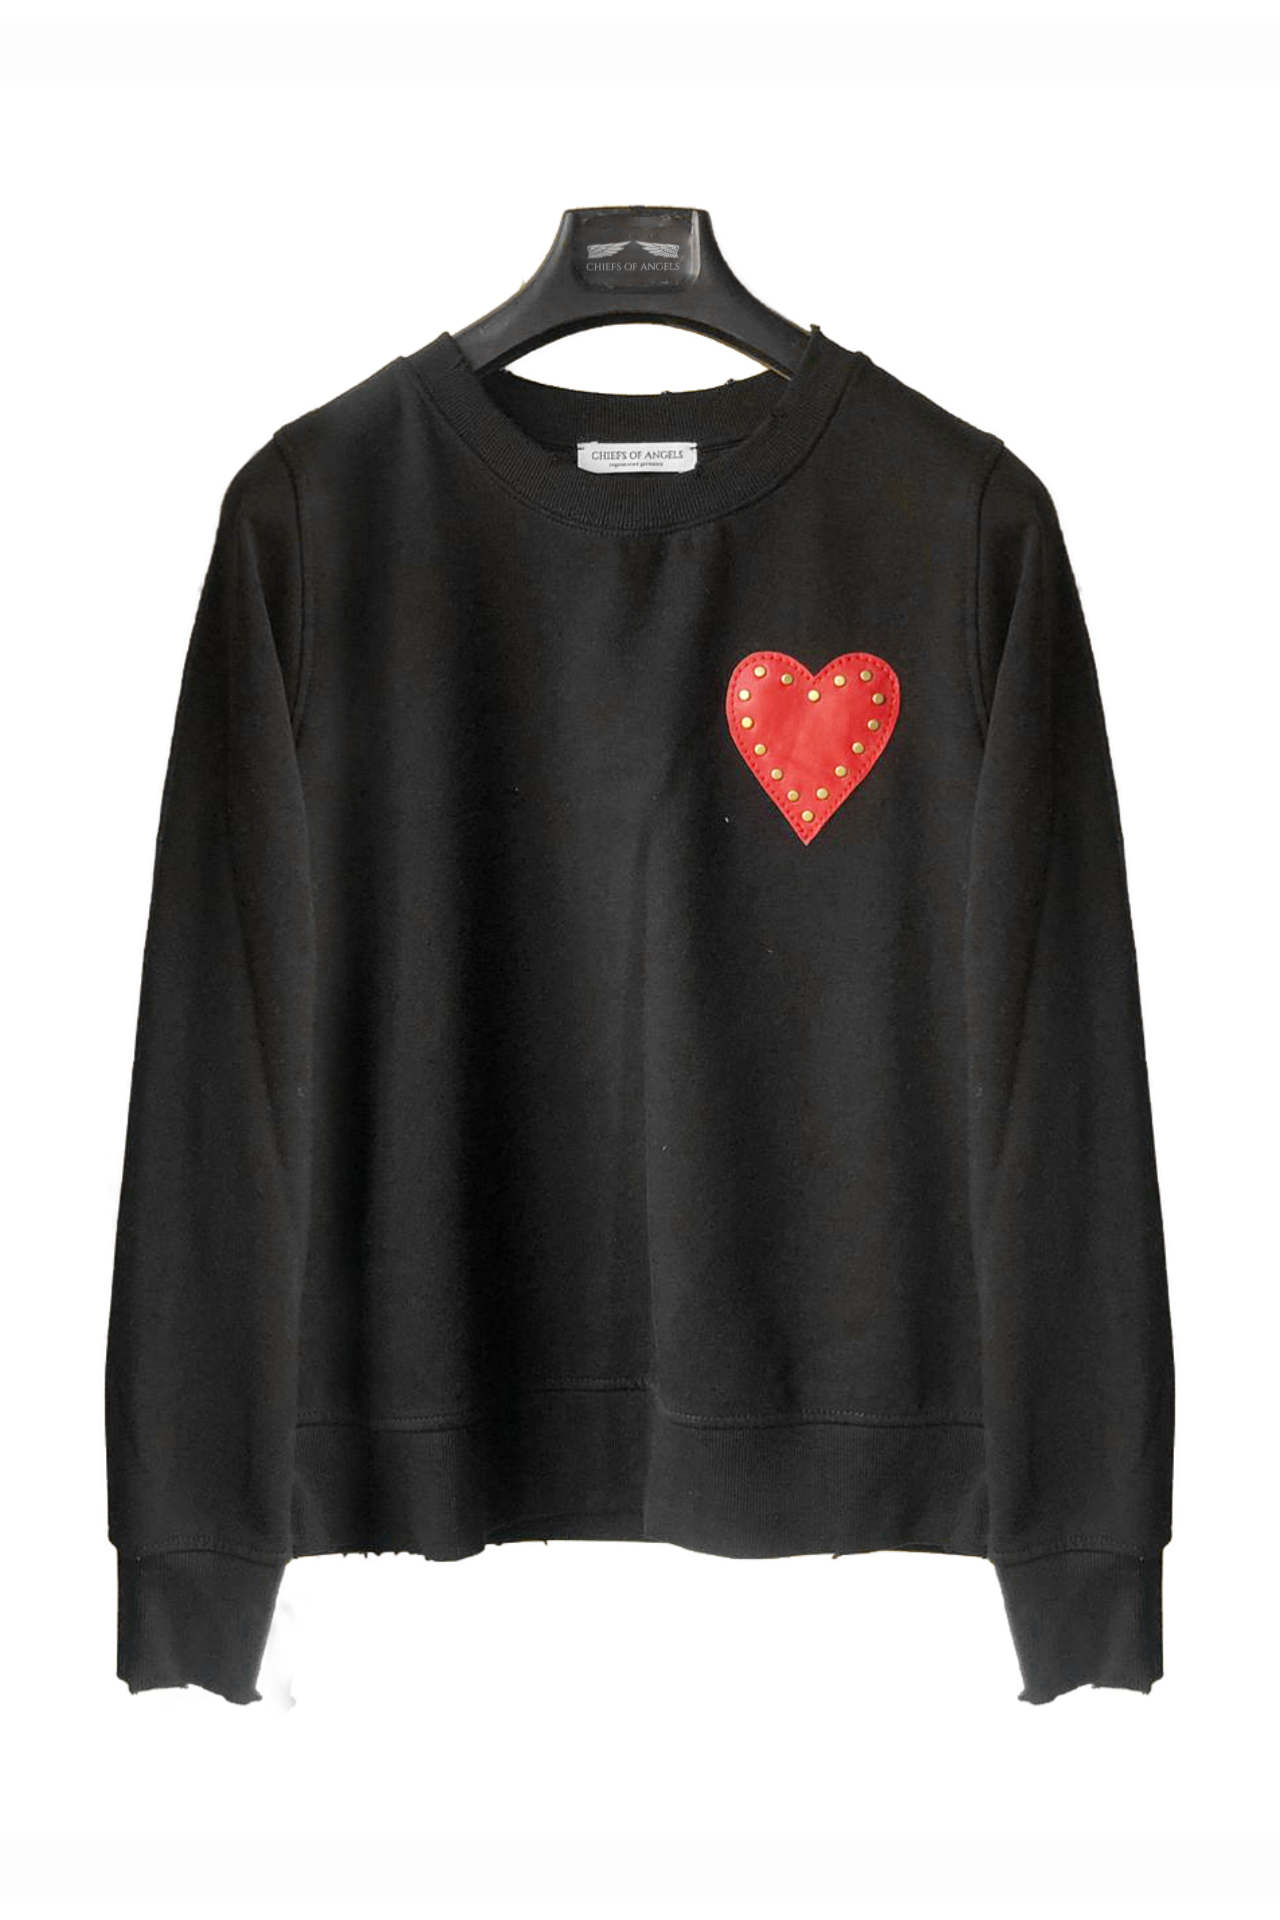 Studded Heart Sweater | Chief Of Angels